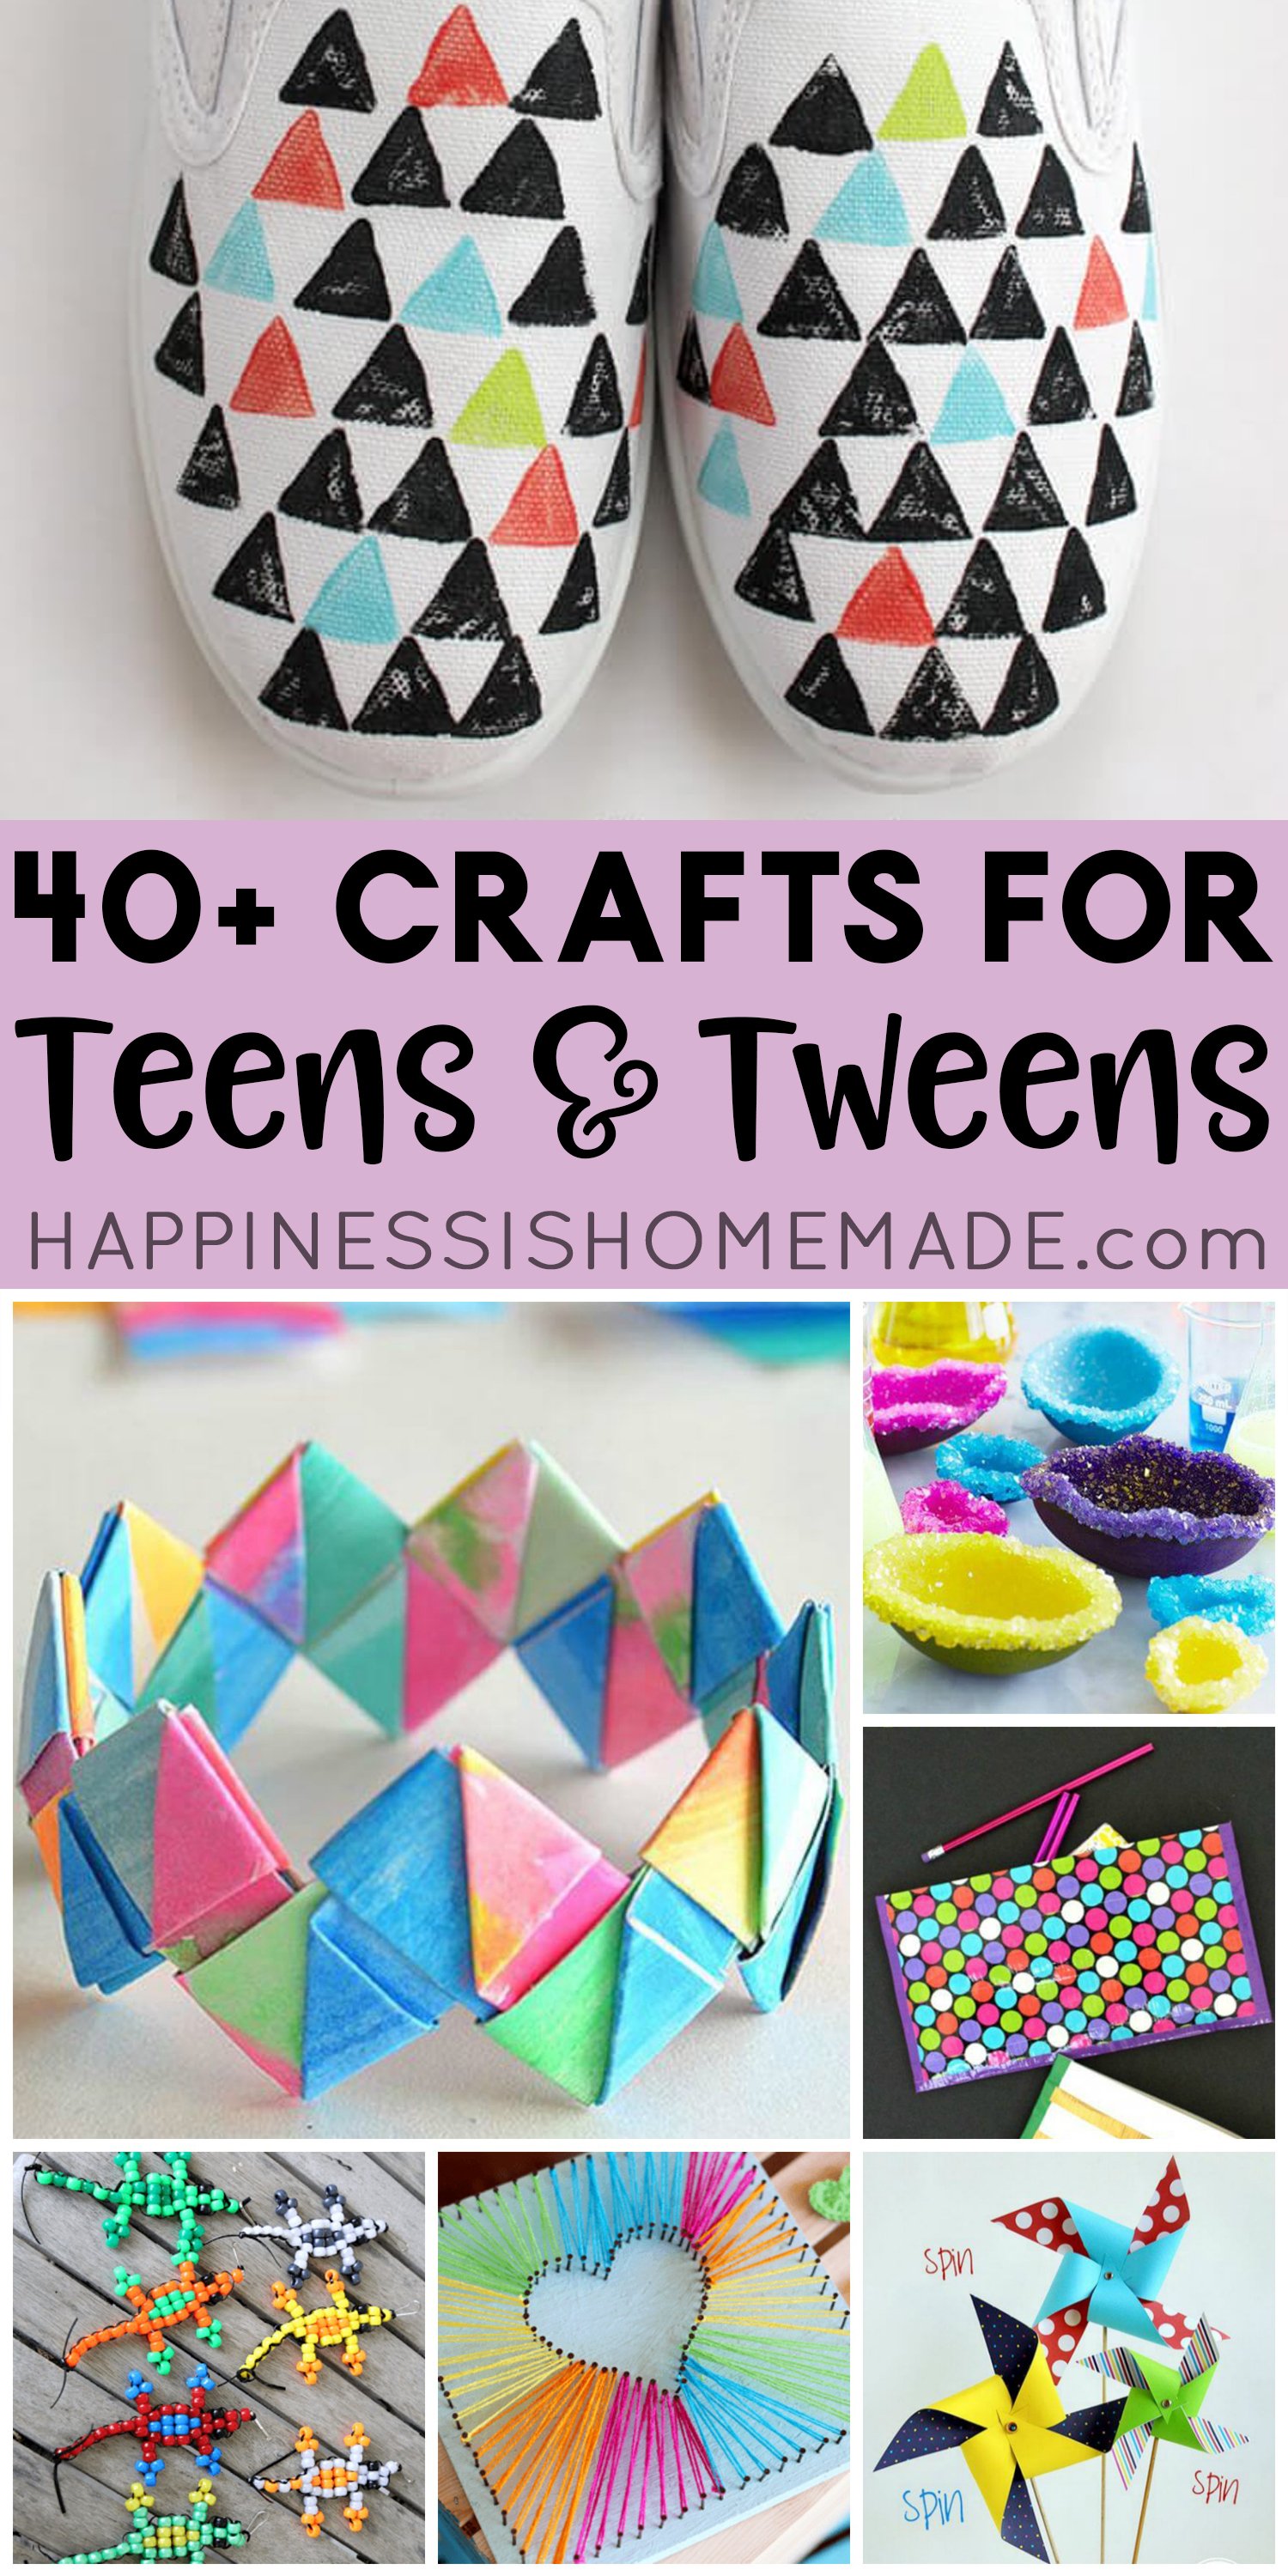 https://www.happinessishomemade.net/wp-content/uploads/2016/05/40-Crafts-for-Teens-and-Tweens.jpg